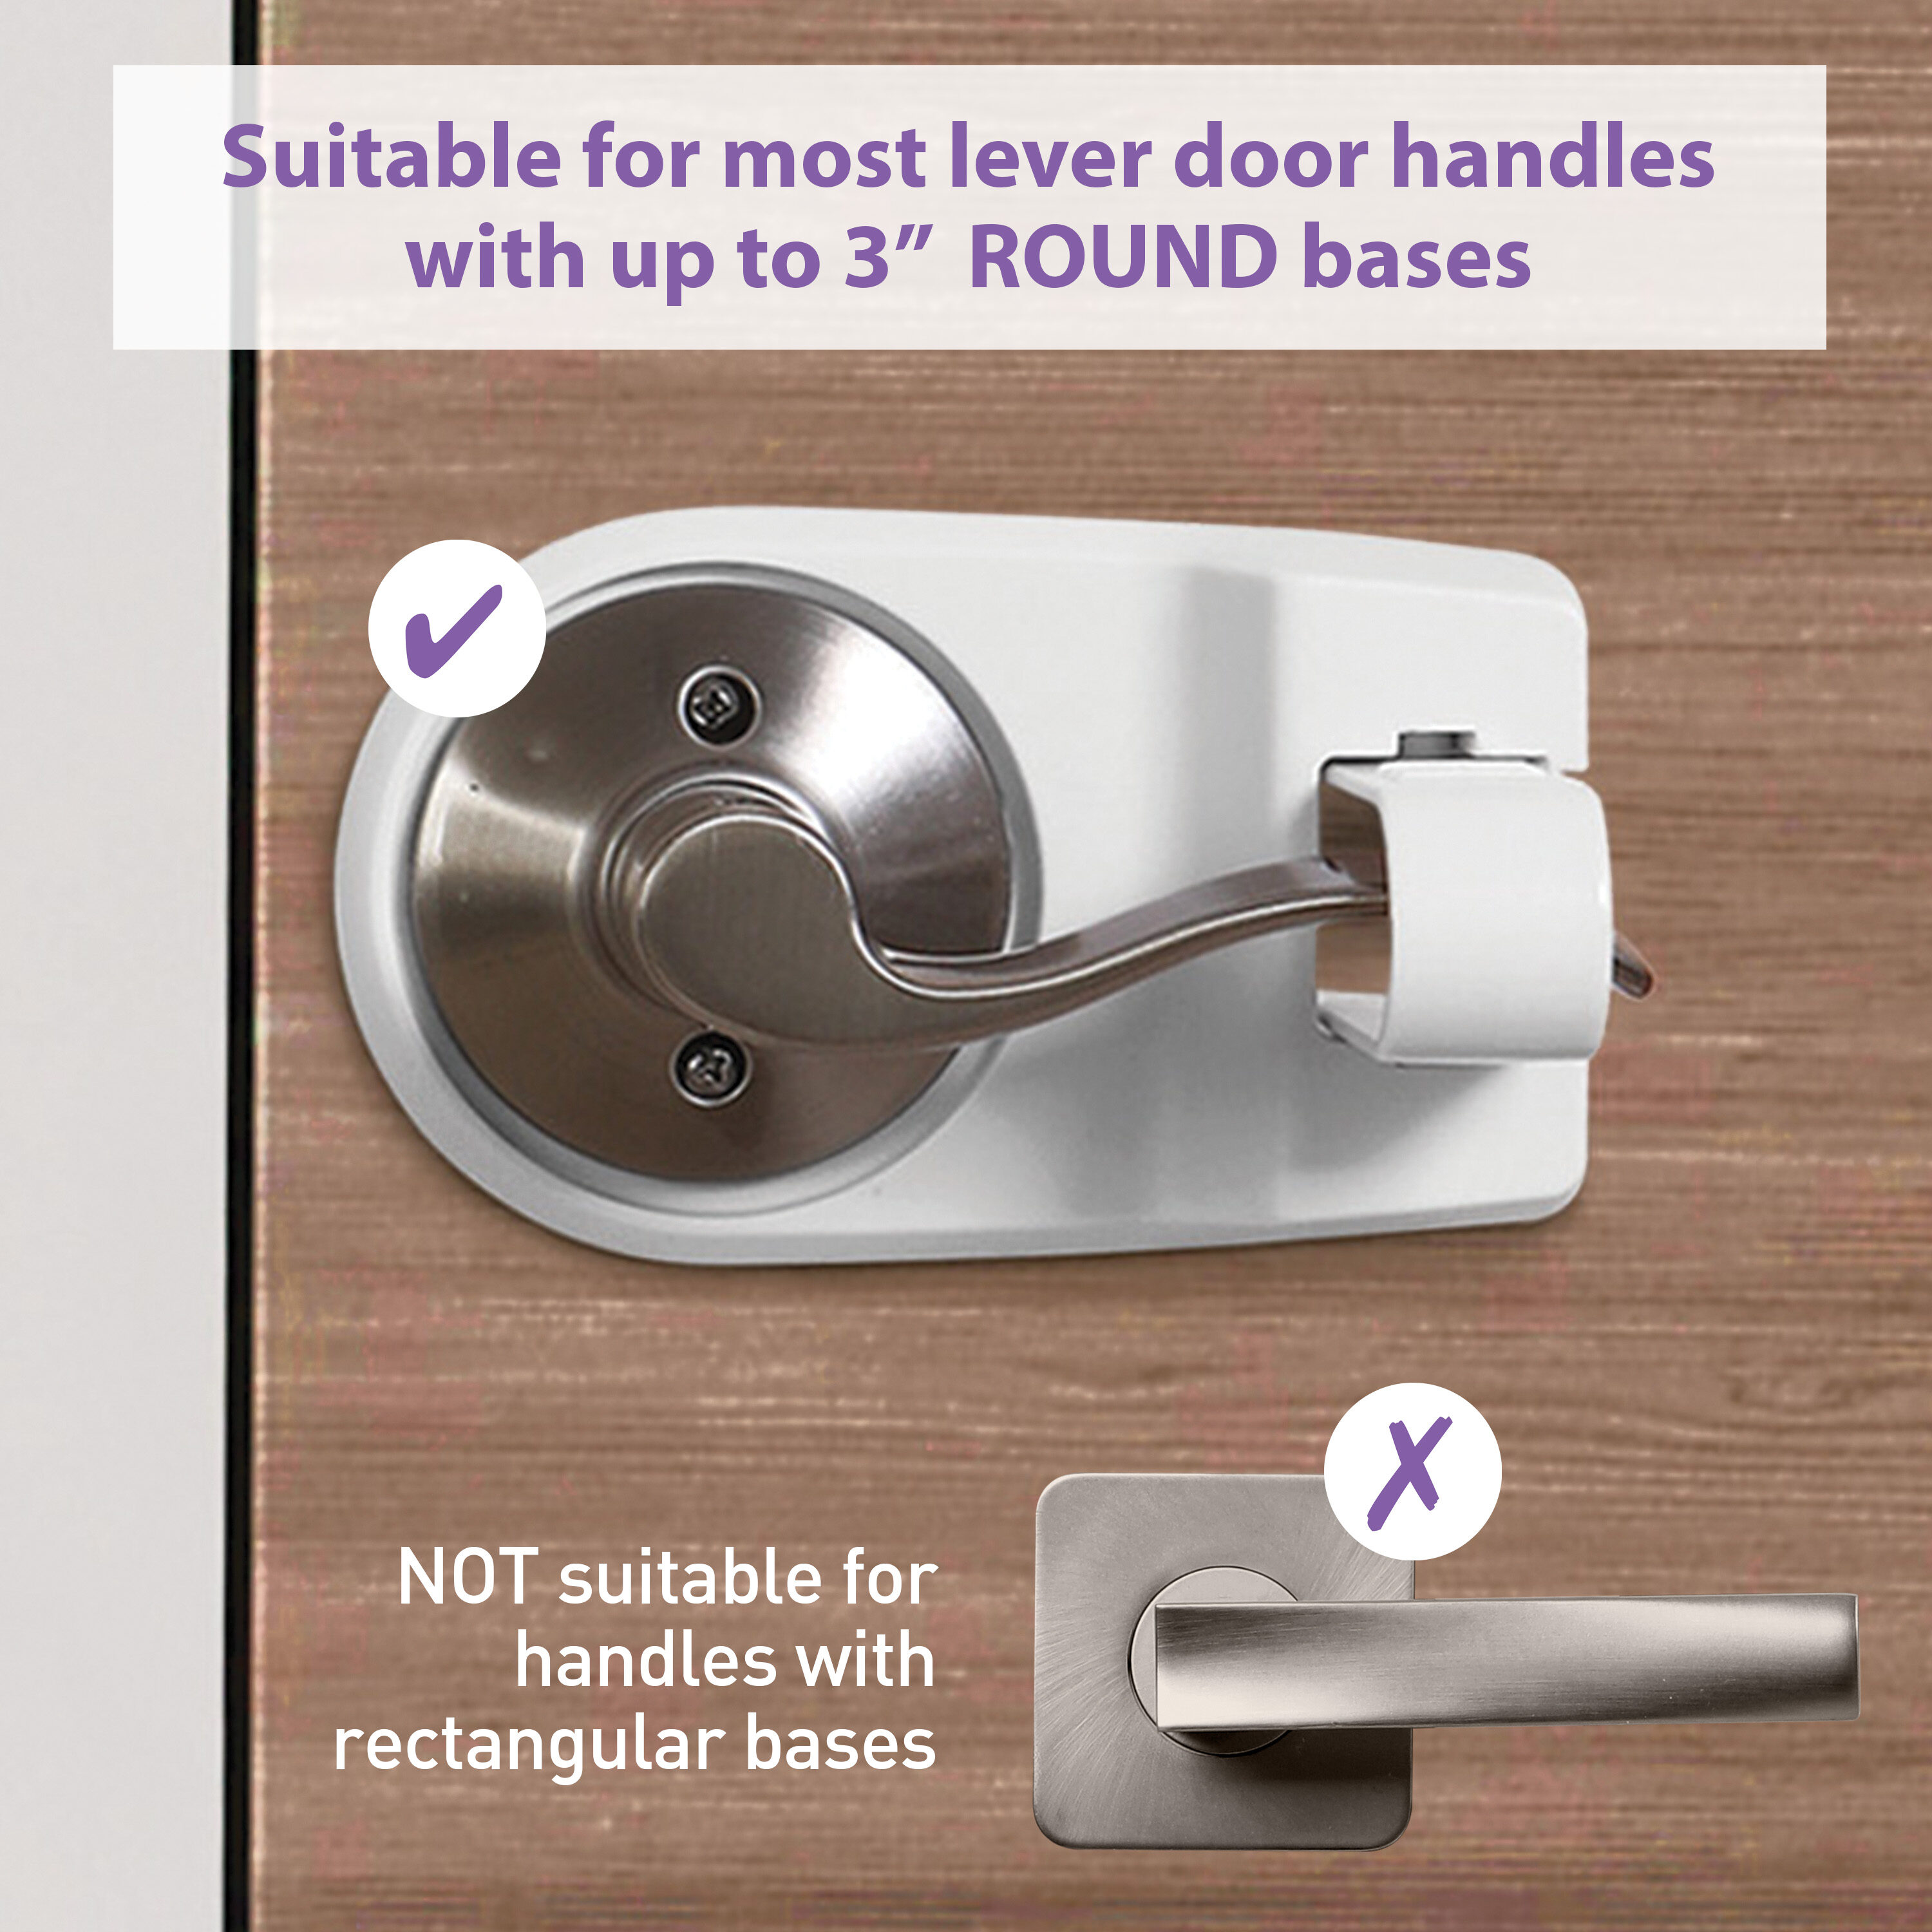 Sliding Cabinet Locks for Child Safety | Baby Proof Your Kitchen, Bathroom, and Storage Doors | Childproof Safety Locks for Knobs and Handles | Easy